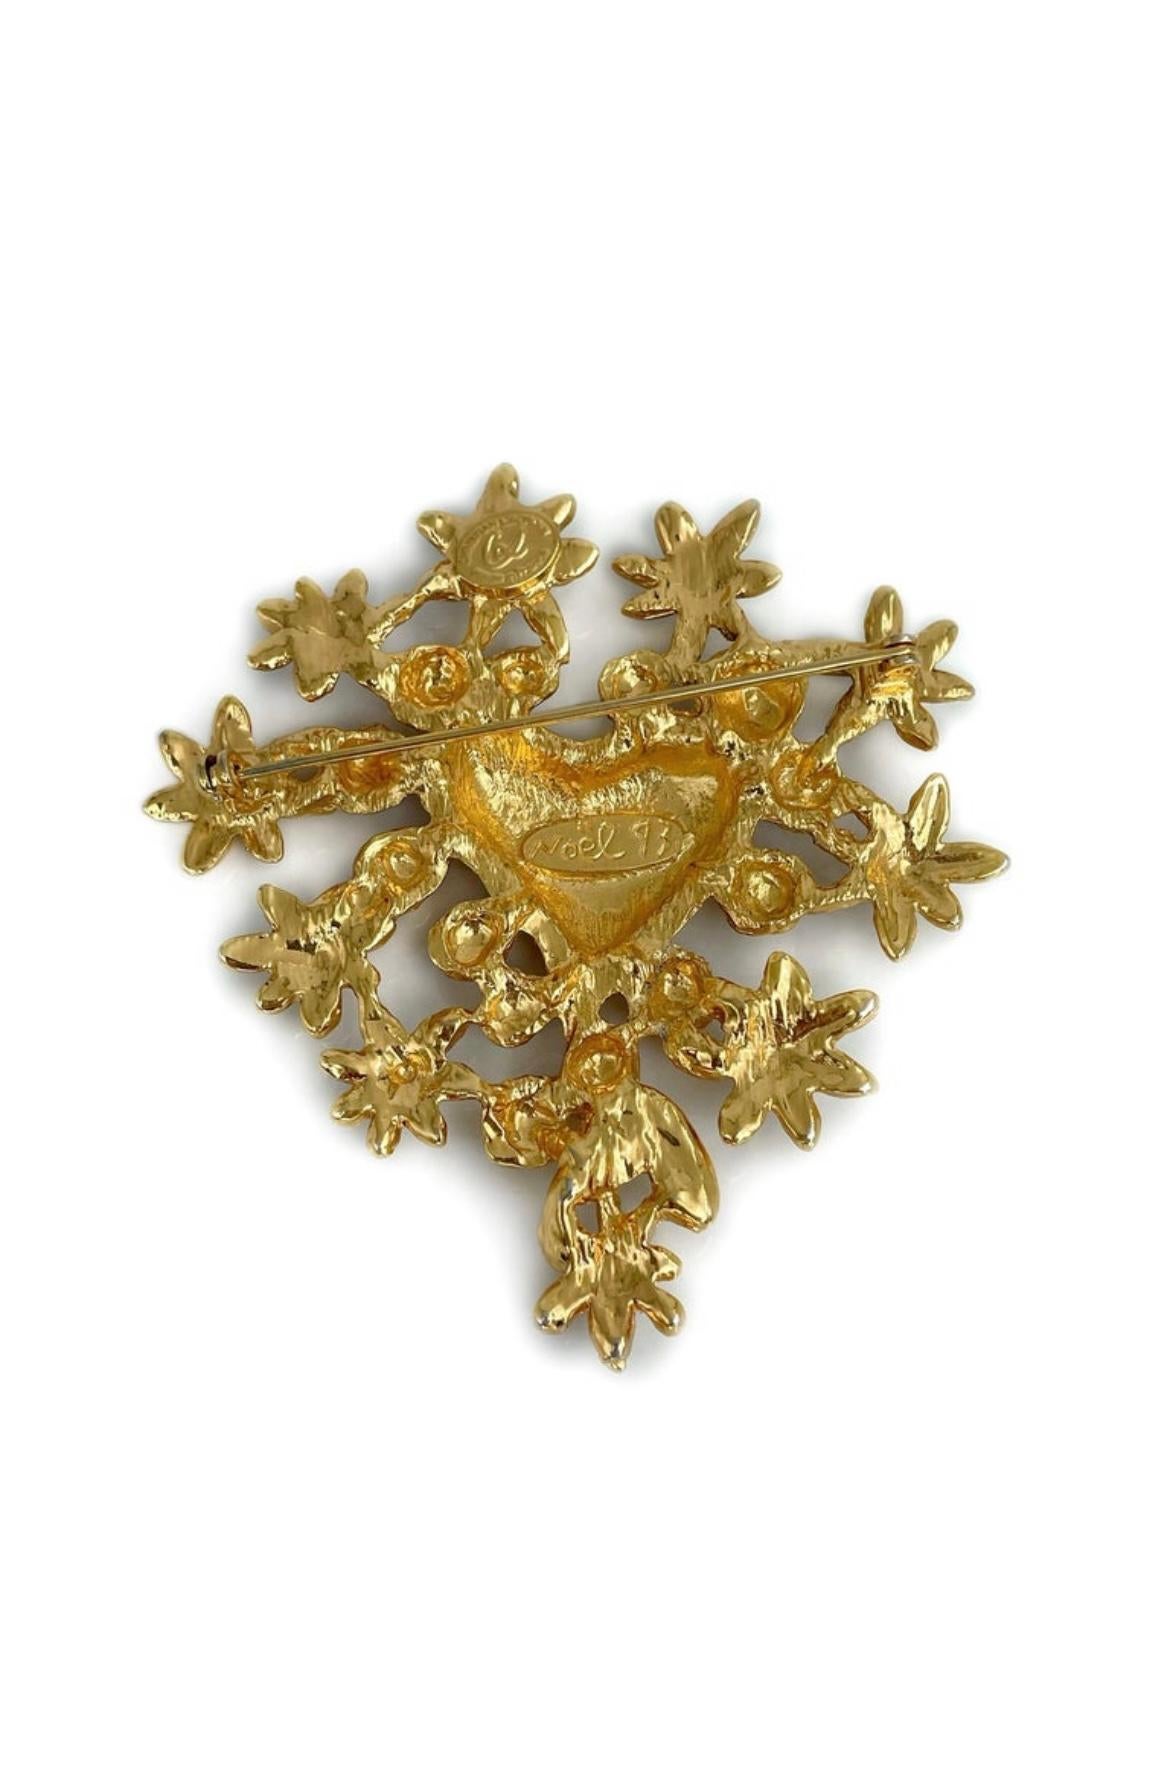 Sublime brooch in a heart shape and flowers with the CL logo in gold plated metal. 

This brooch was created by Christian Lacroix in 1993, it is a limited edition produced especially for the Christmas season.

Made in France / End of the 20th